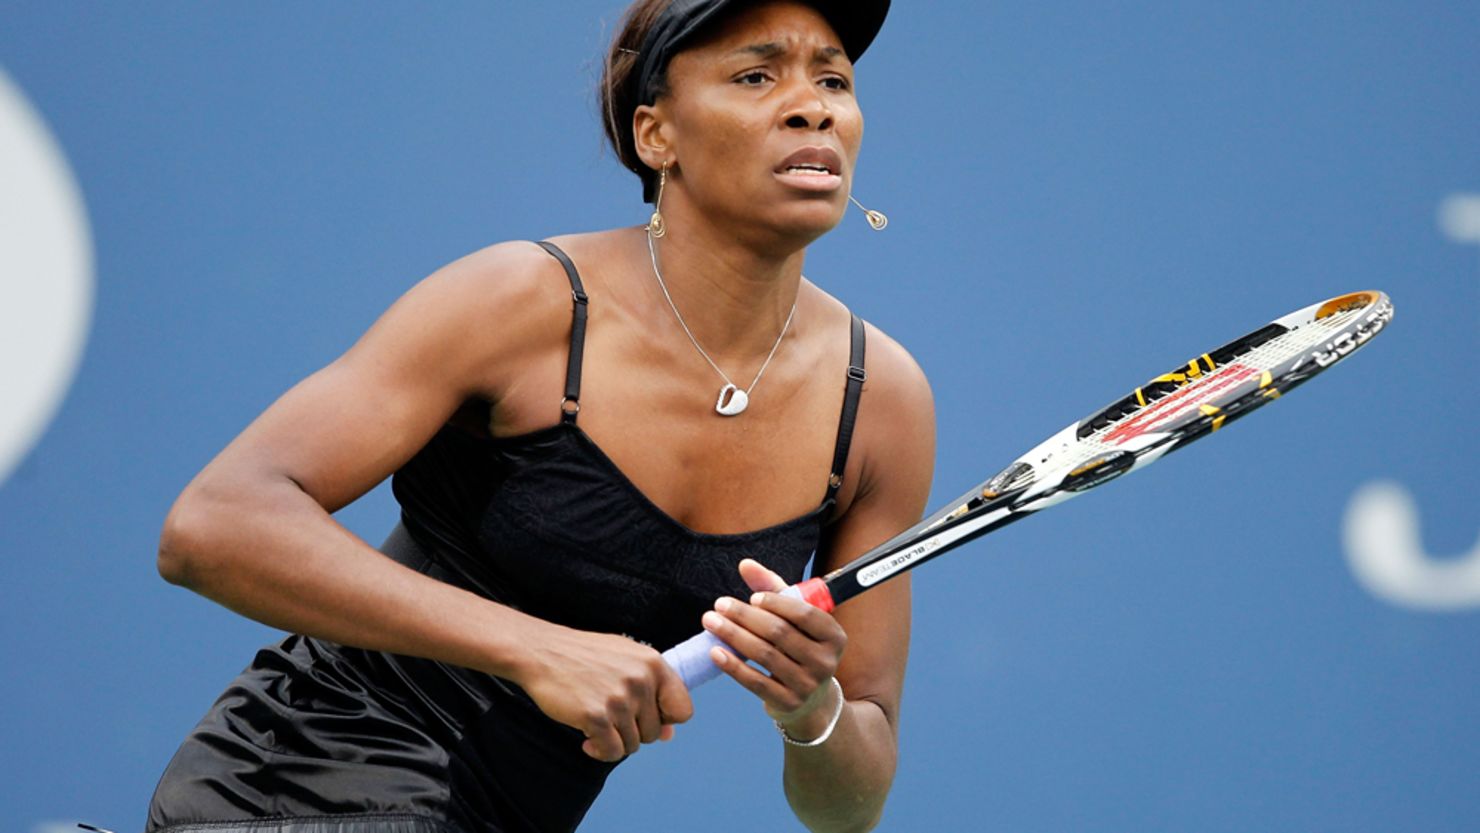 Elite athletes like Venus Williams may be more likely to receive an earlier diagnosis. 